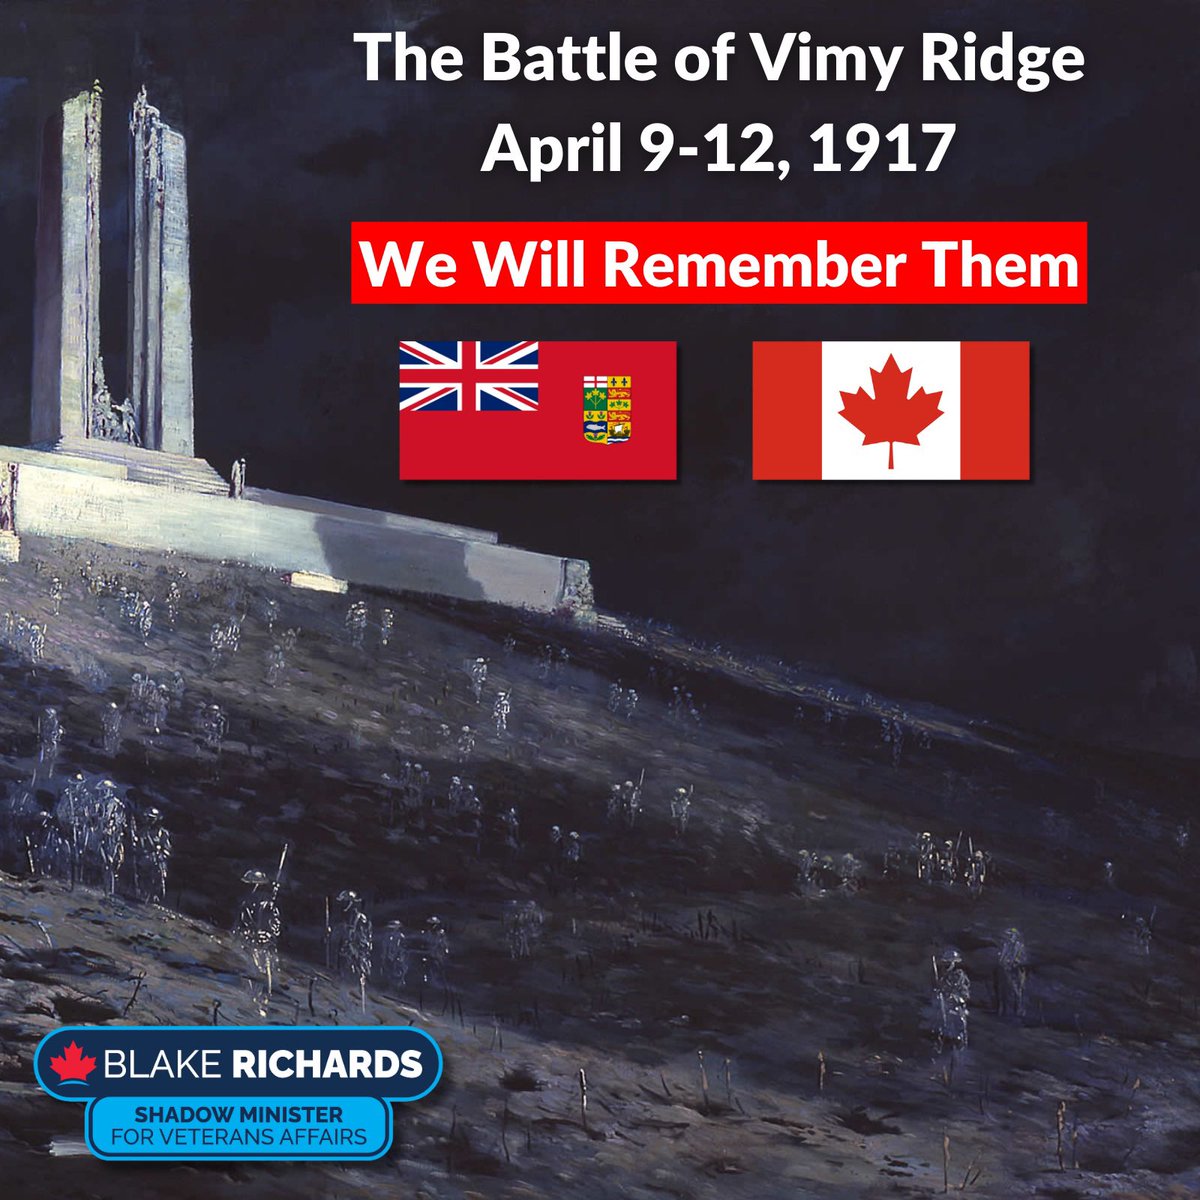 On April 9, 1917, four Canadian divisions stormed Vimy Ridge – all together, for the first time, and accomplished what many previously deemed impossible. From April 9 to April 12, 1917, 100,000 Canadians who served in the battle successfully liberated Vimy Ridge. On this day,…